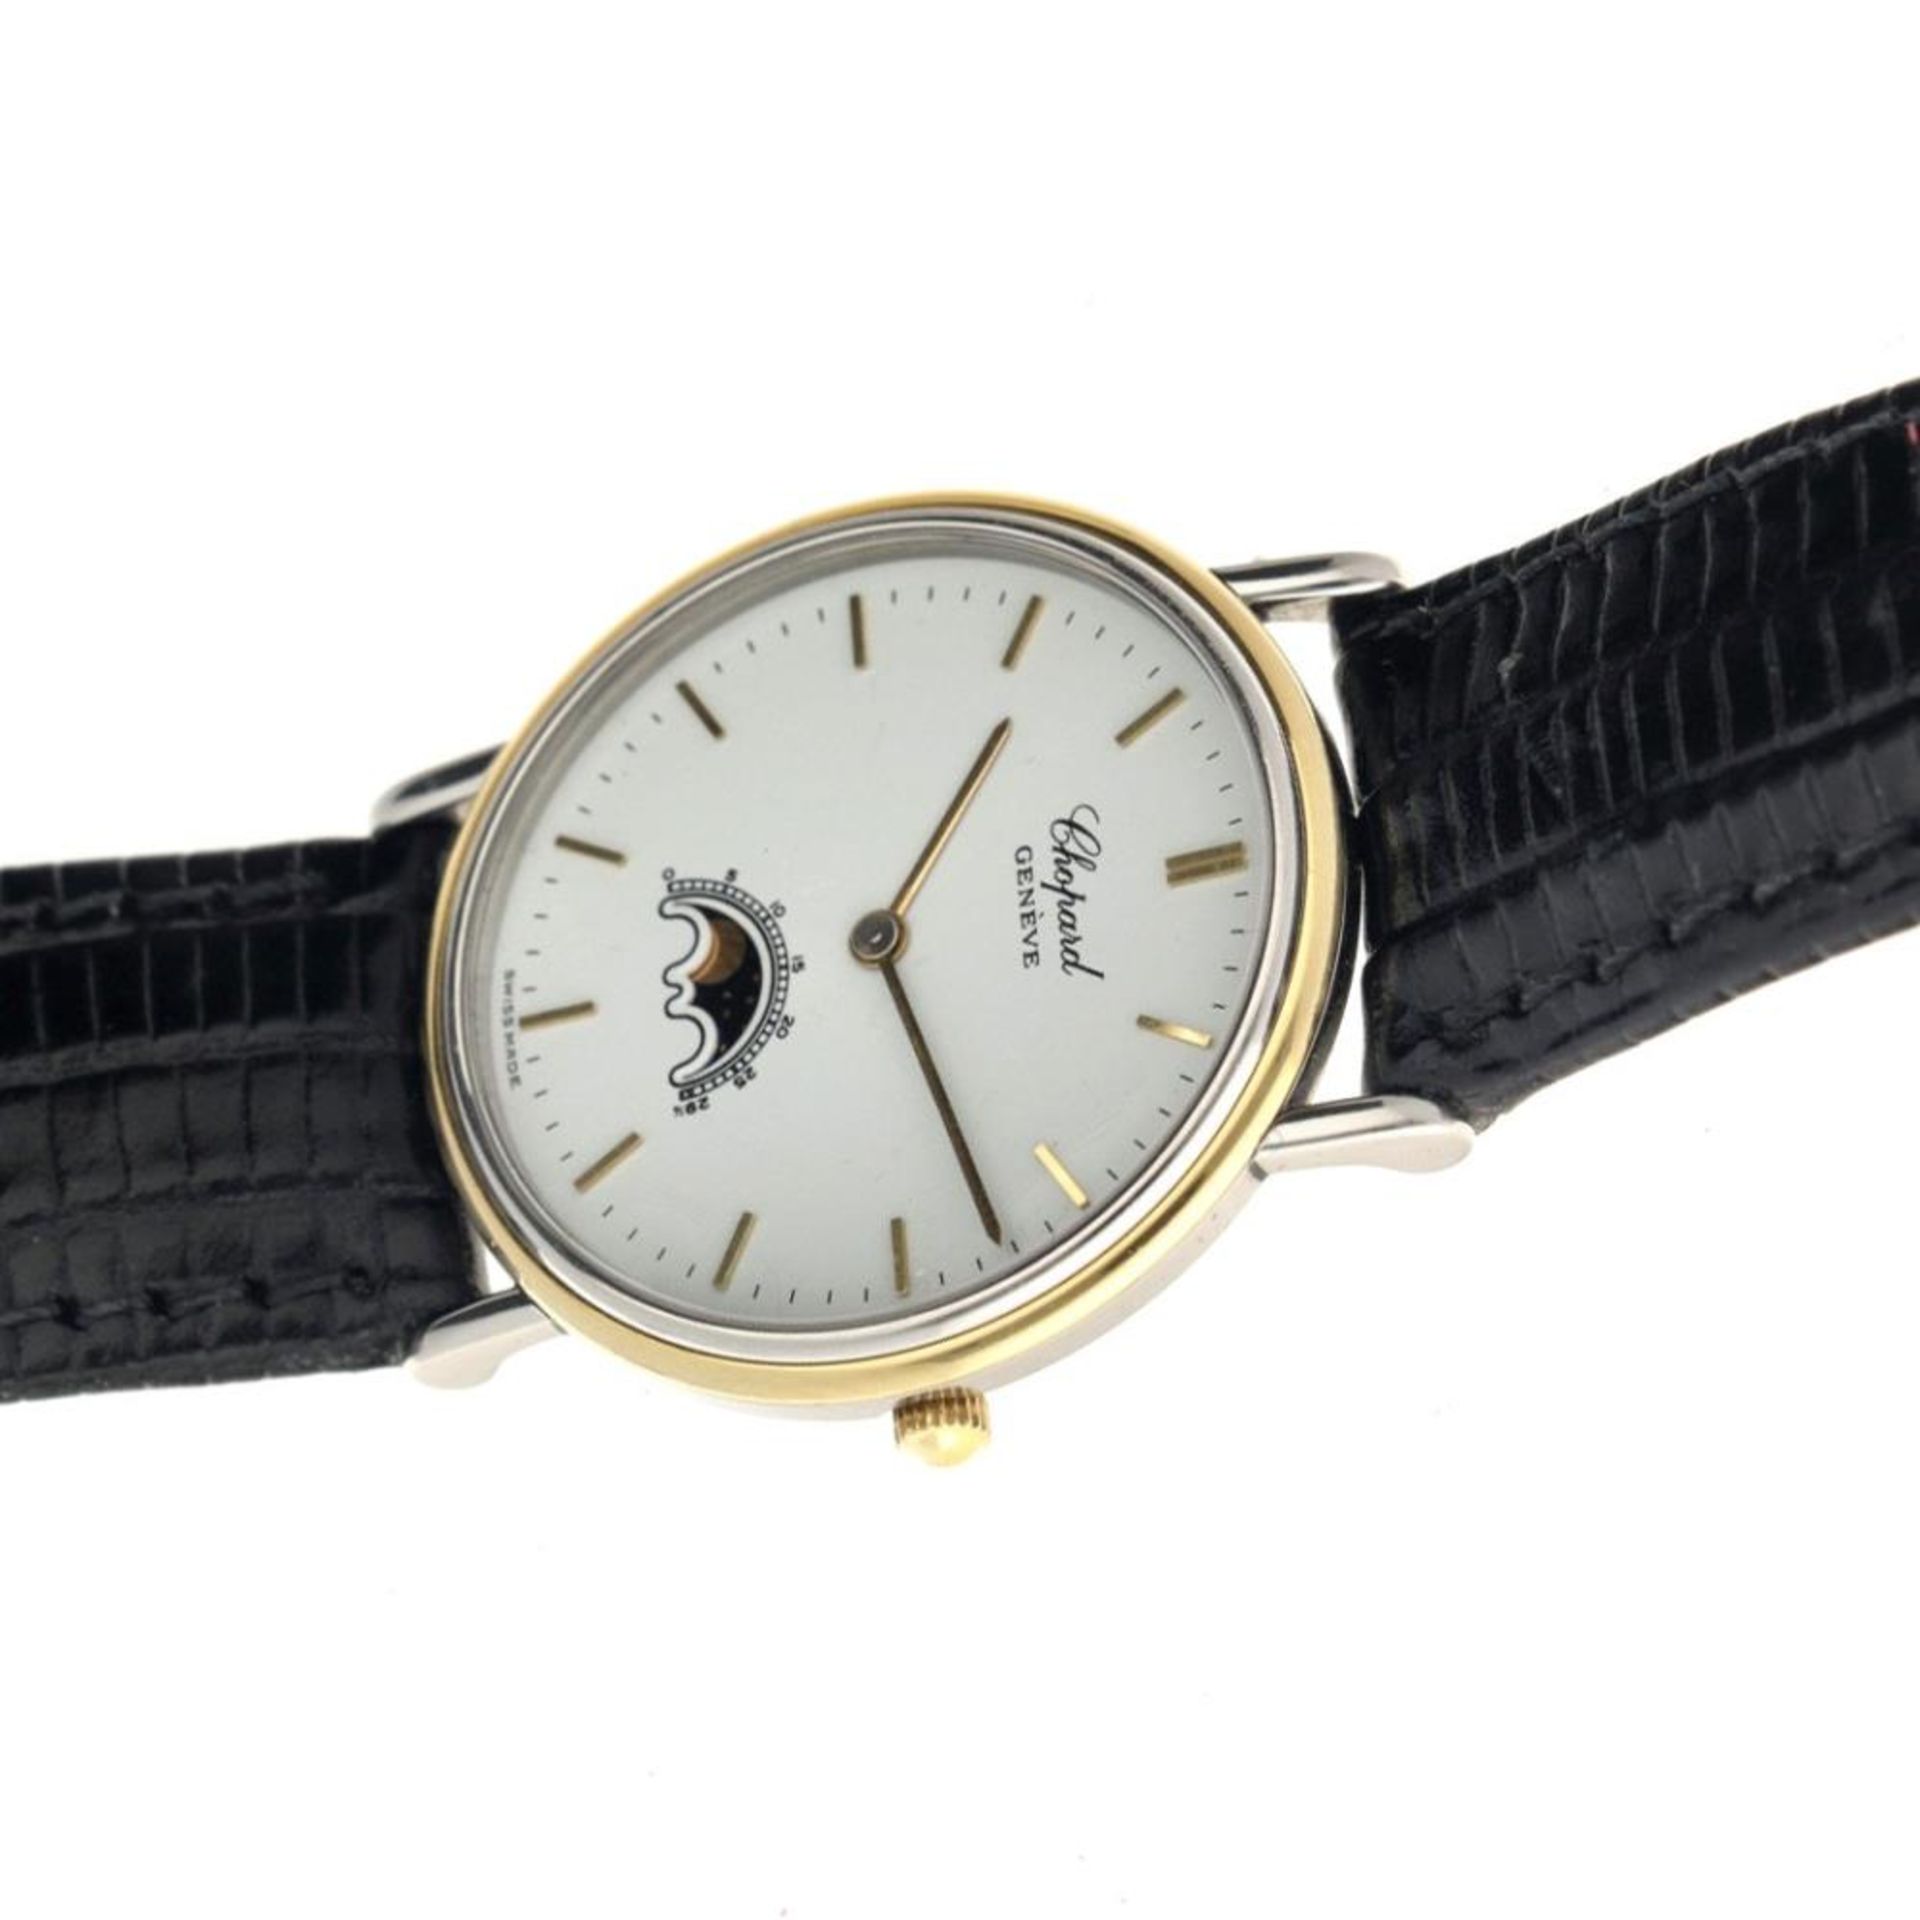 Chopard 36/8097 - Men's watch - approx. 1980. - Image 3 of 6